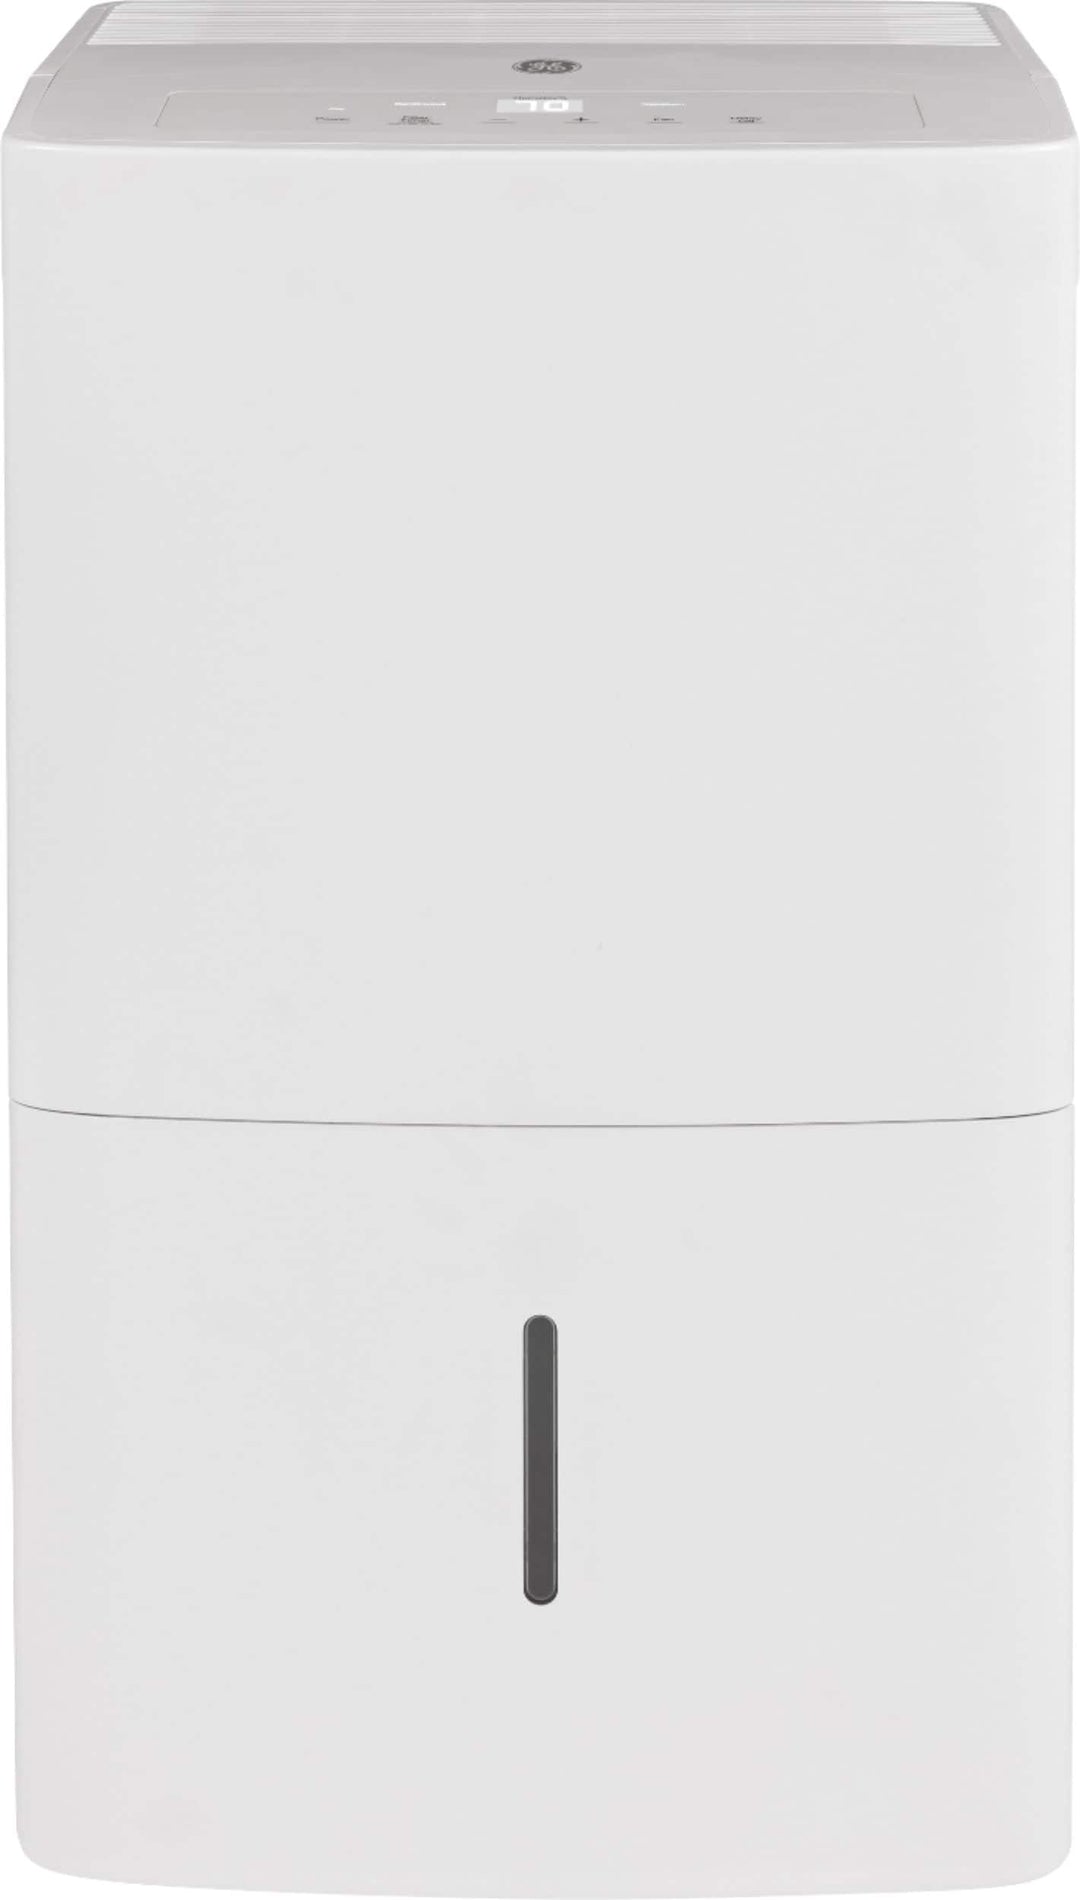 GE - 50-Pint Portable Dehumidifier with 3 Fan Speeds - White_1